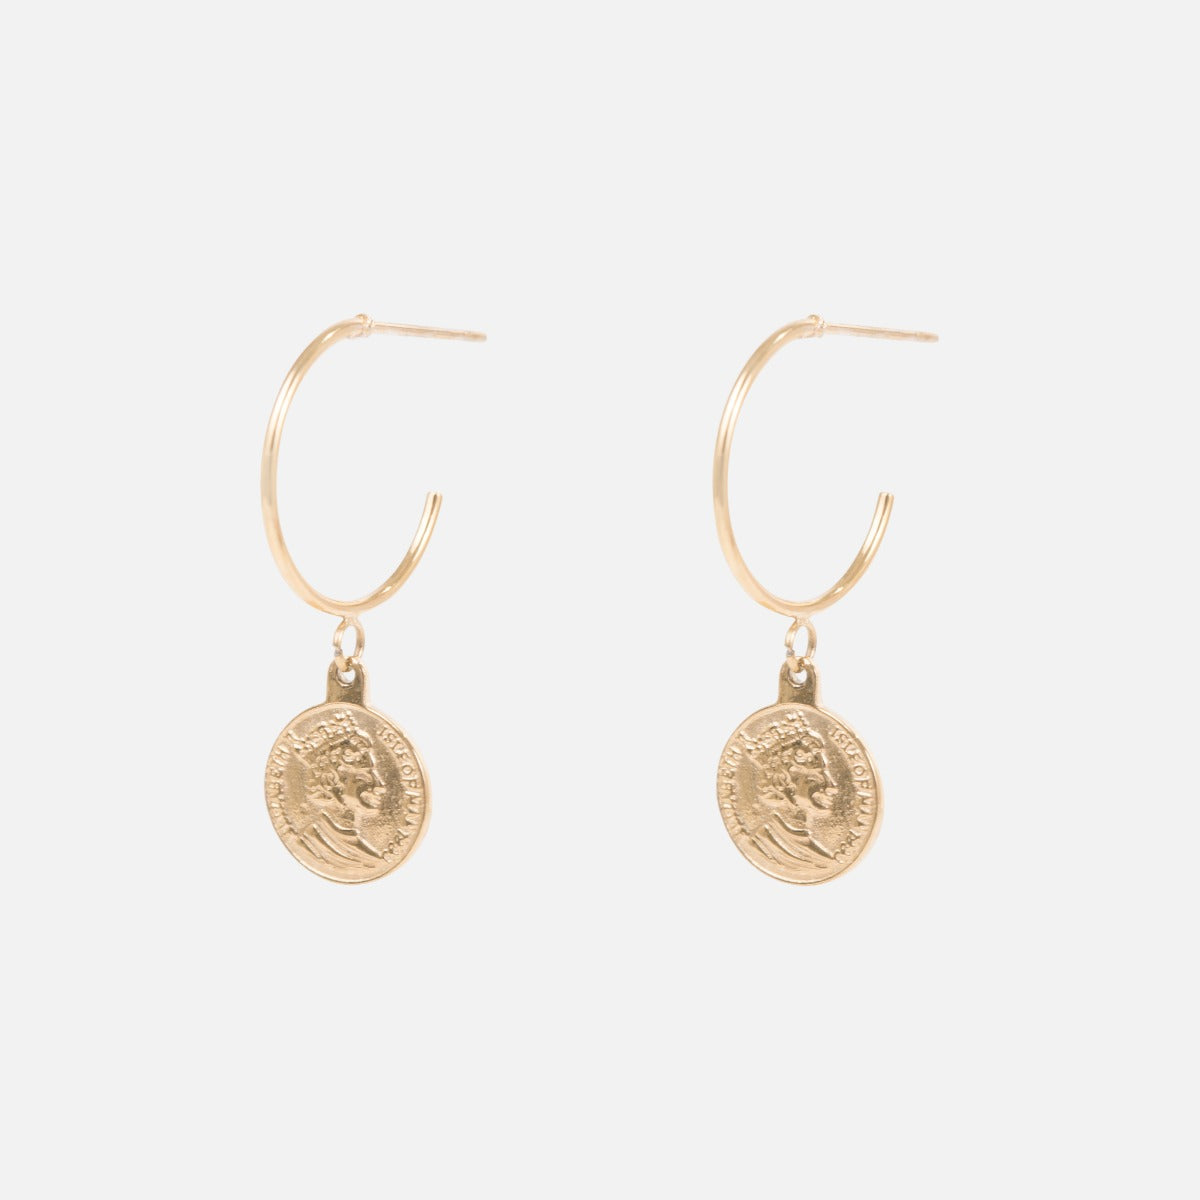 Golden stainless steel earrings with coin